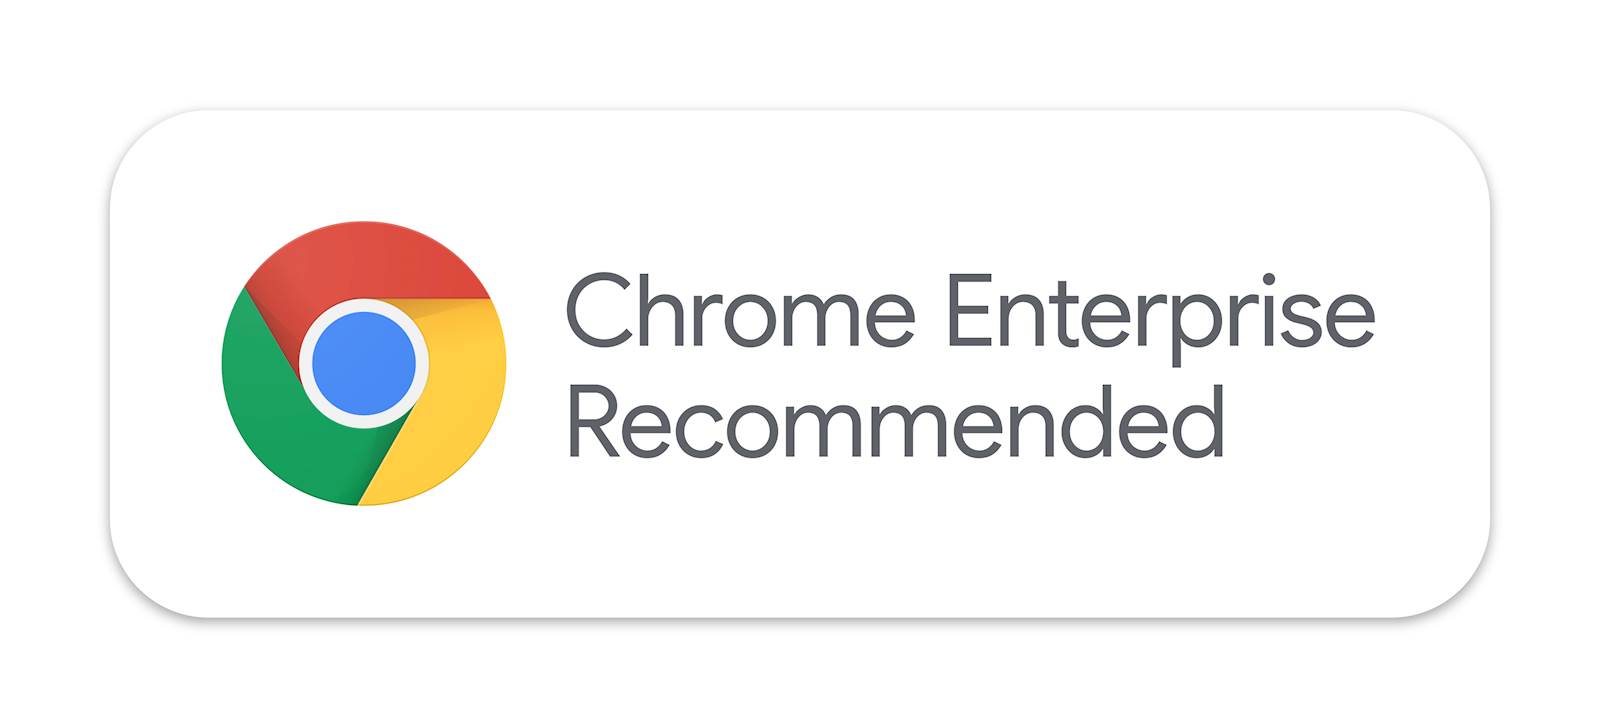 image Copy-of%20Chrome%20Enterprise%20Recommended%20Badge%20(RGB)